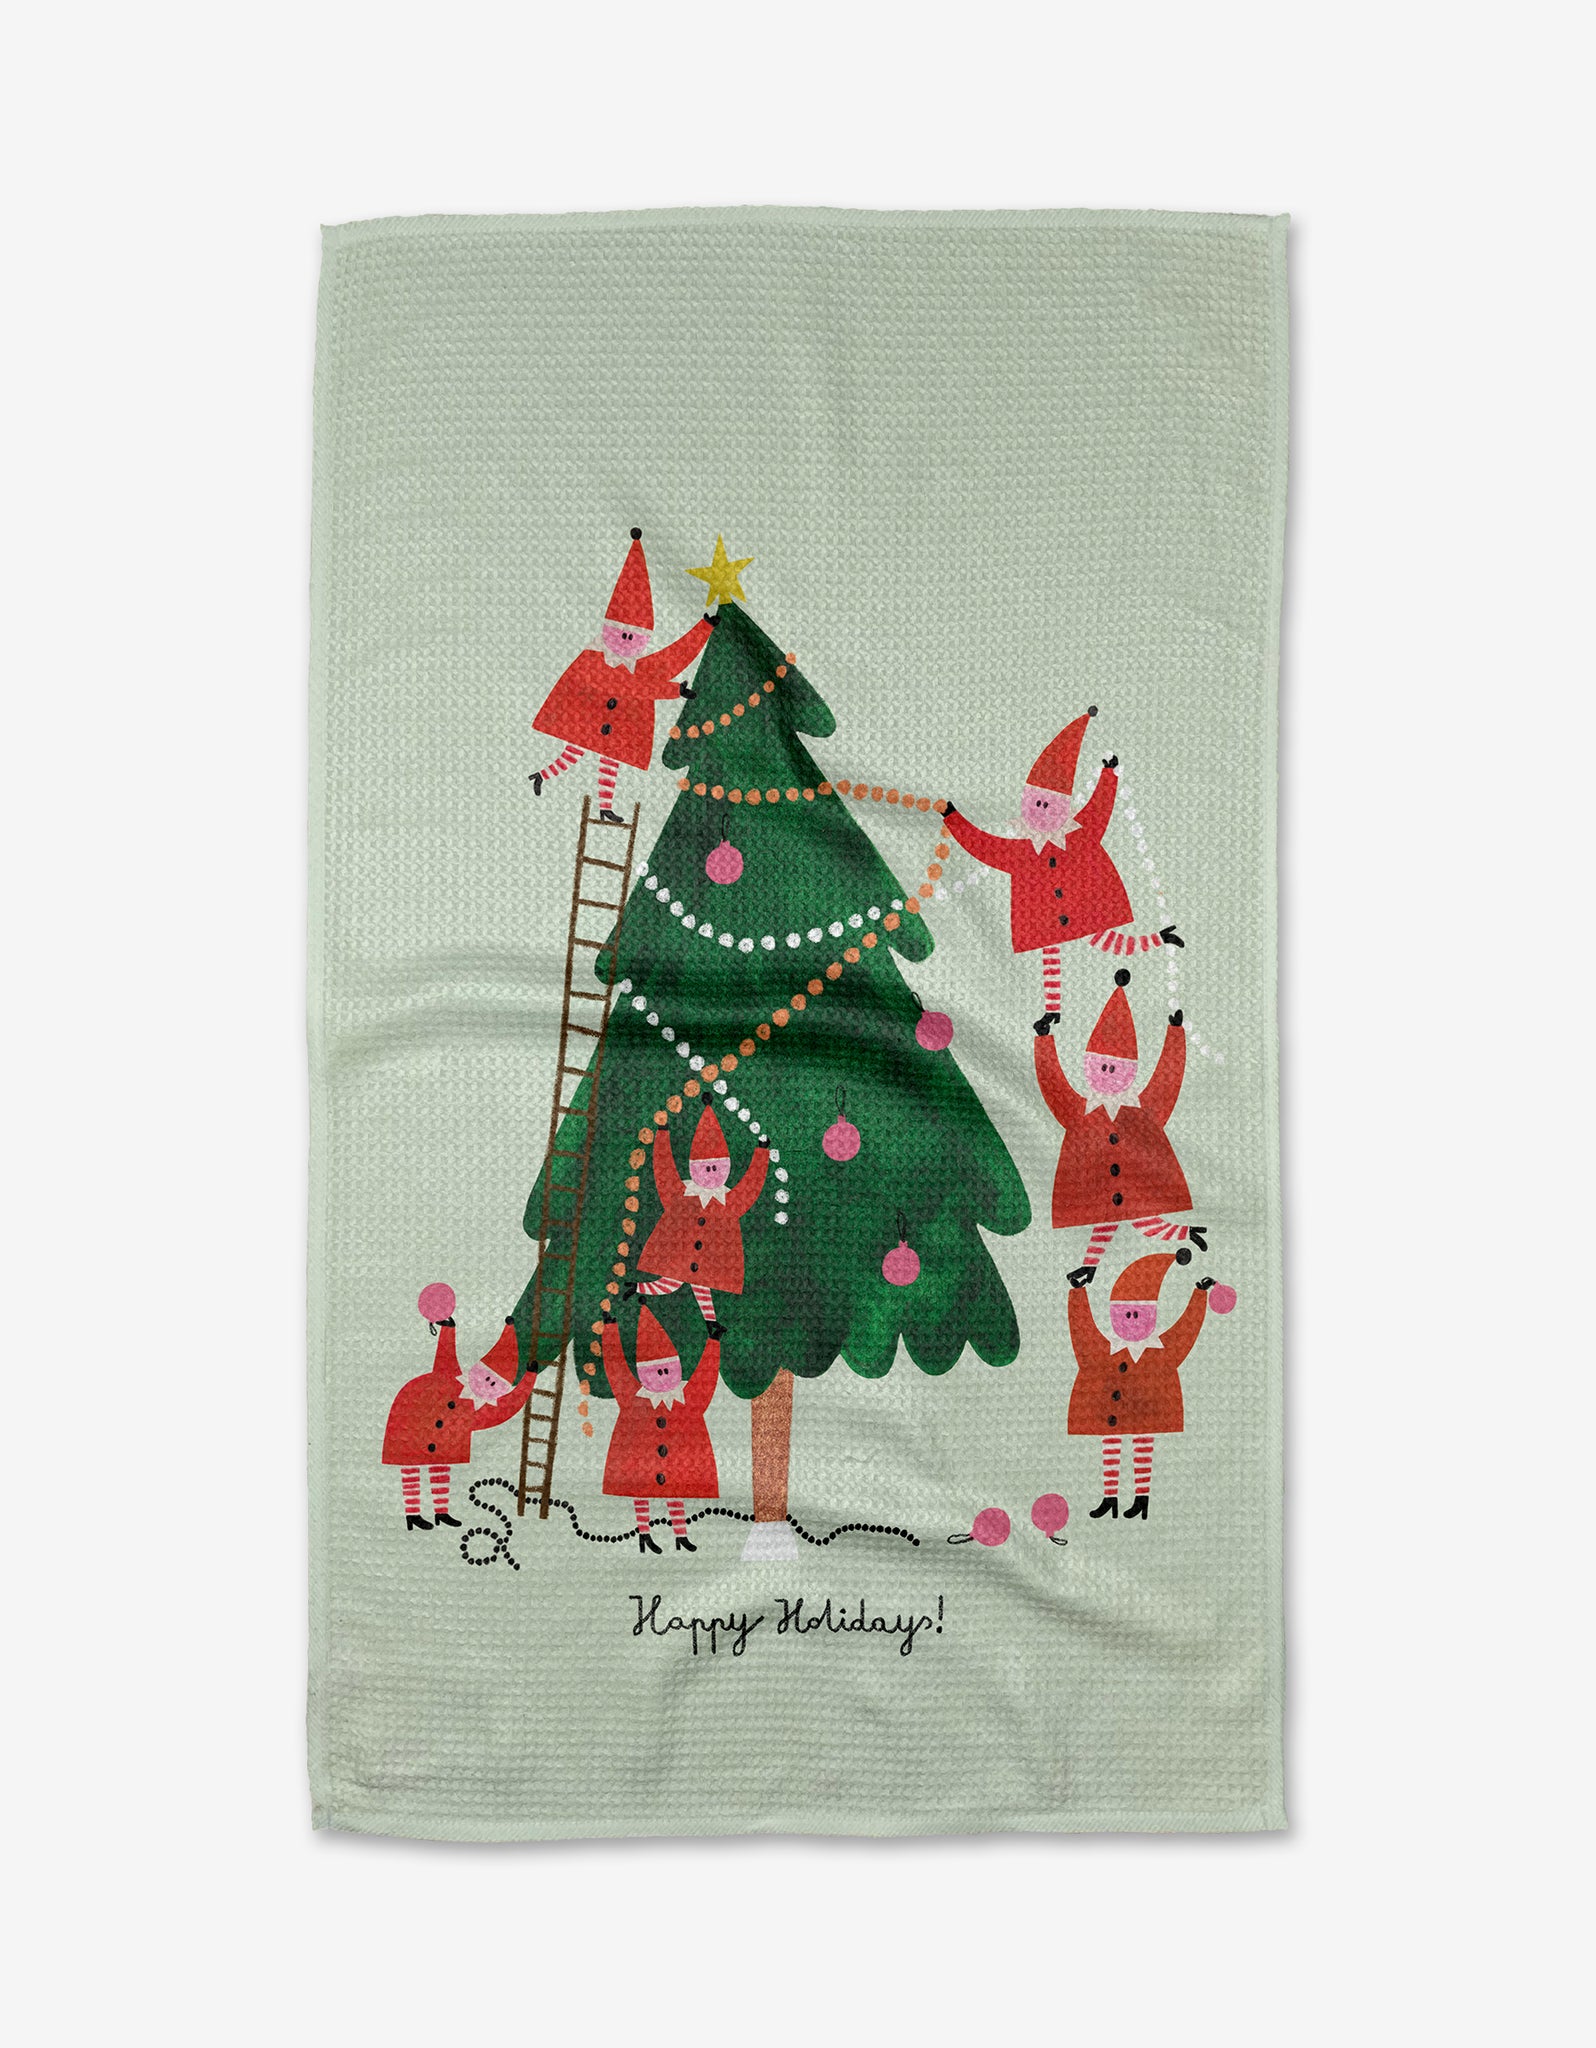 Holiday Geometry kitchen towels would make great swap gifts under $20!  These festive patterns are just too cute to pass up 🎄